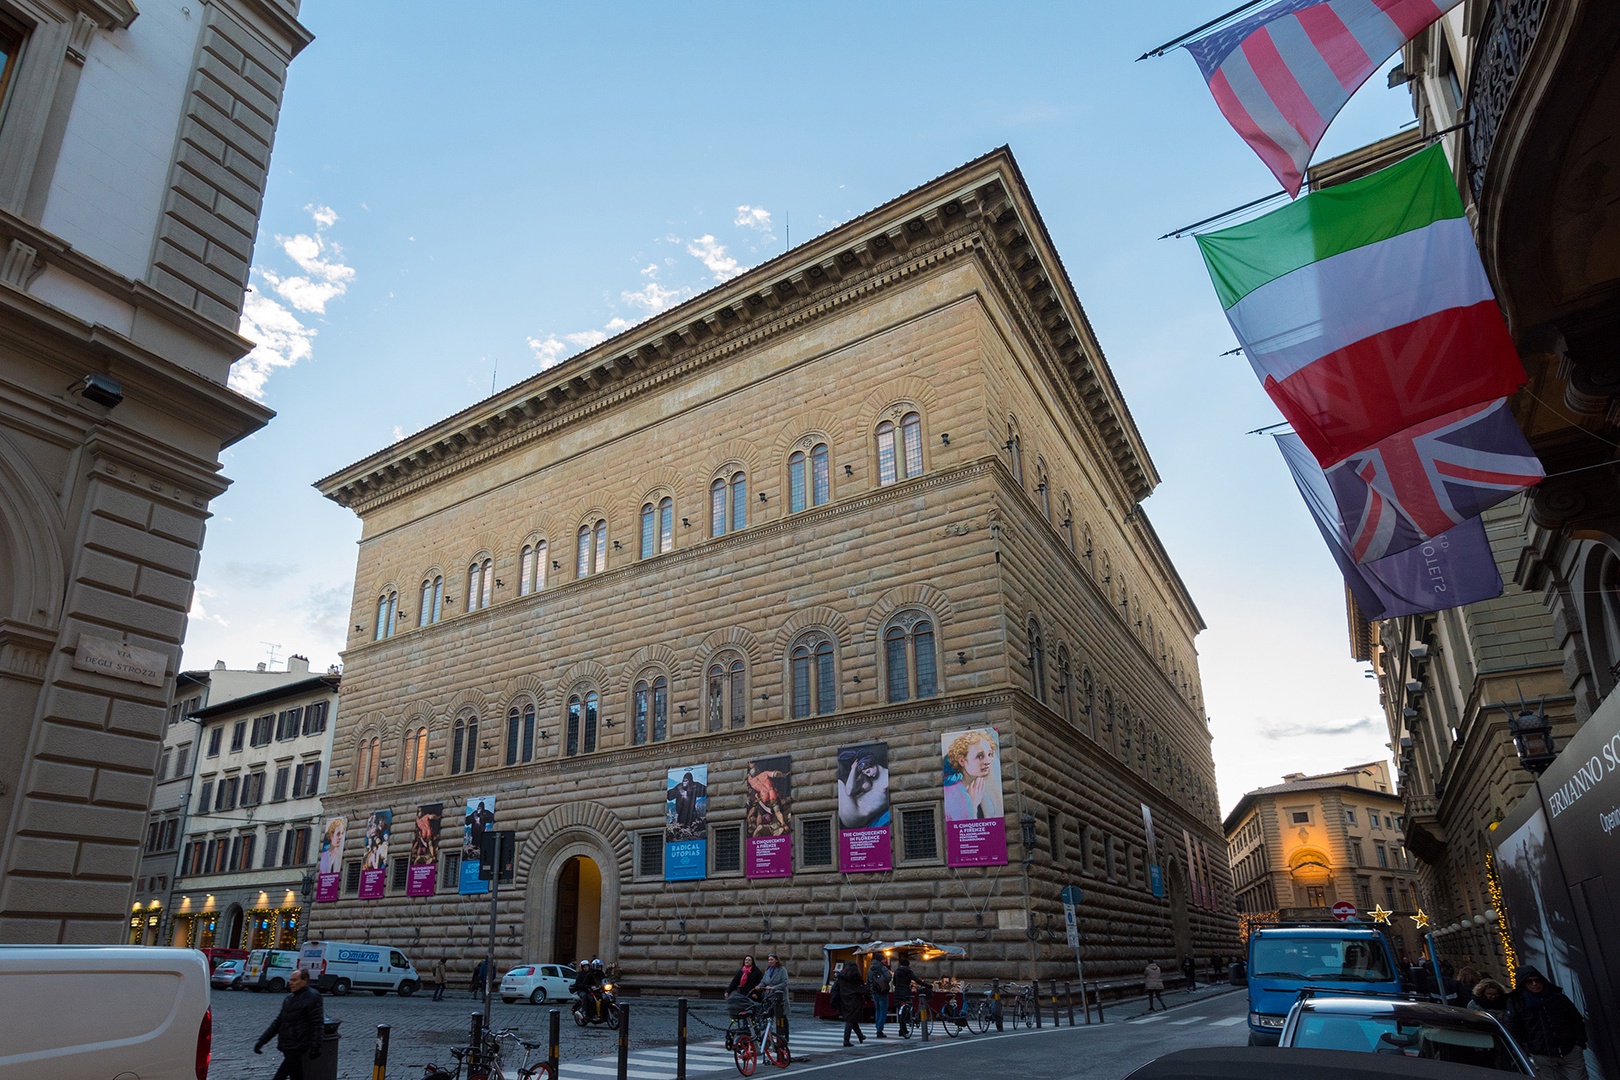 Palazzo Strozzi nearby is known for its architecture and wonderful exhibitions.